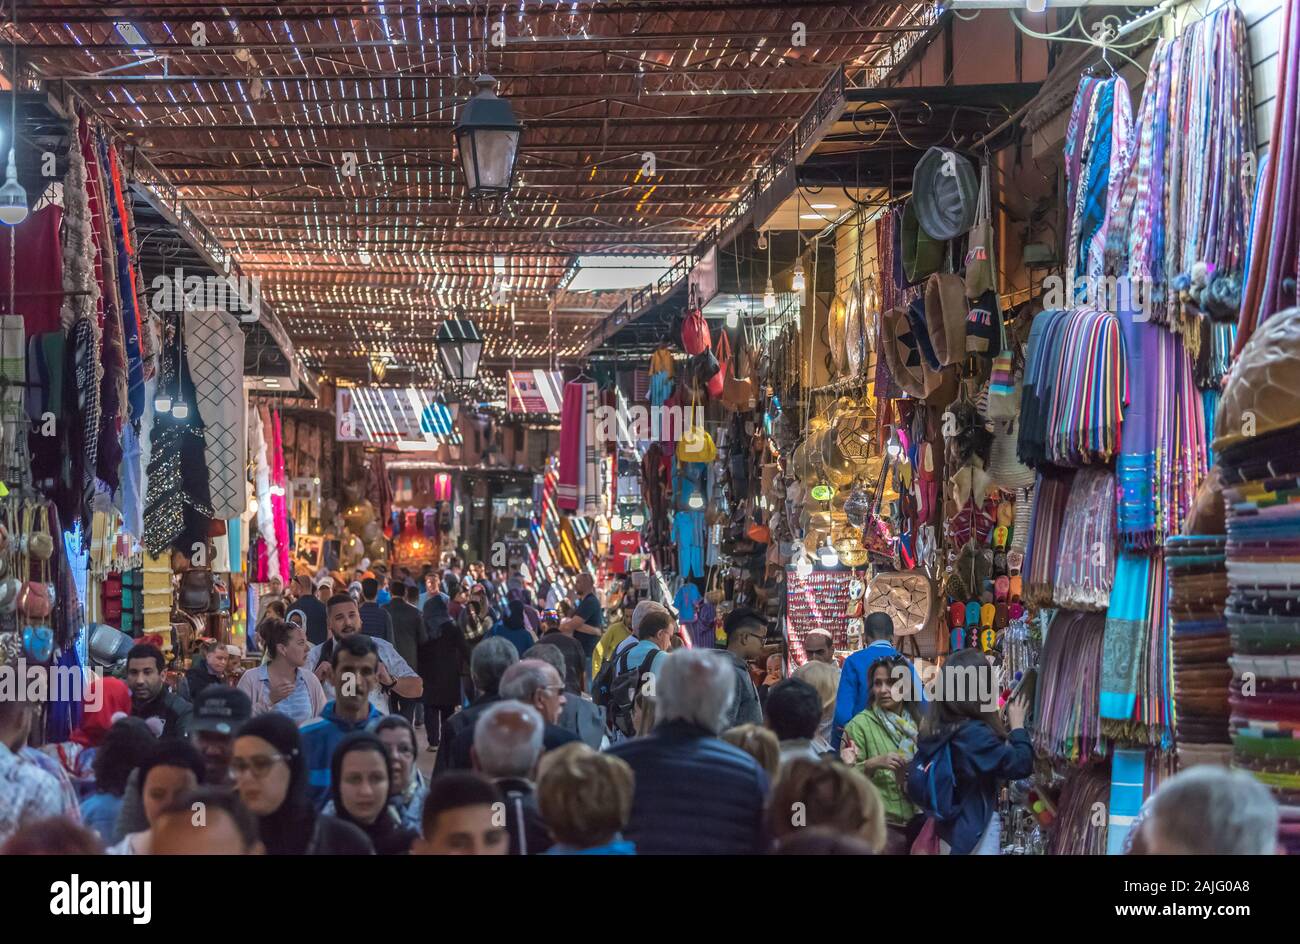 Marrakech, Morocco: People and tourists strolling, booths and stalls in alley nearby Jemma Dar Fna, souk market in Marrakesh medina, crowded bazaar Stock Photo